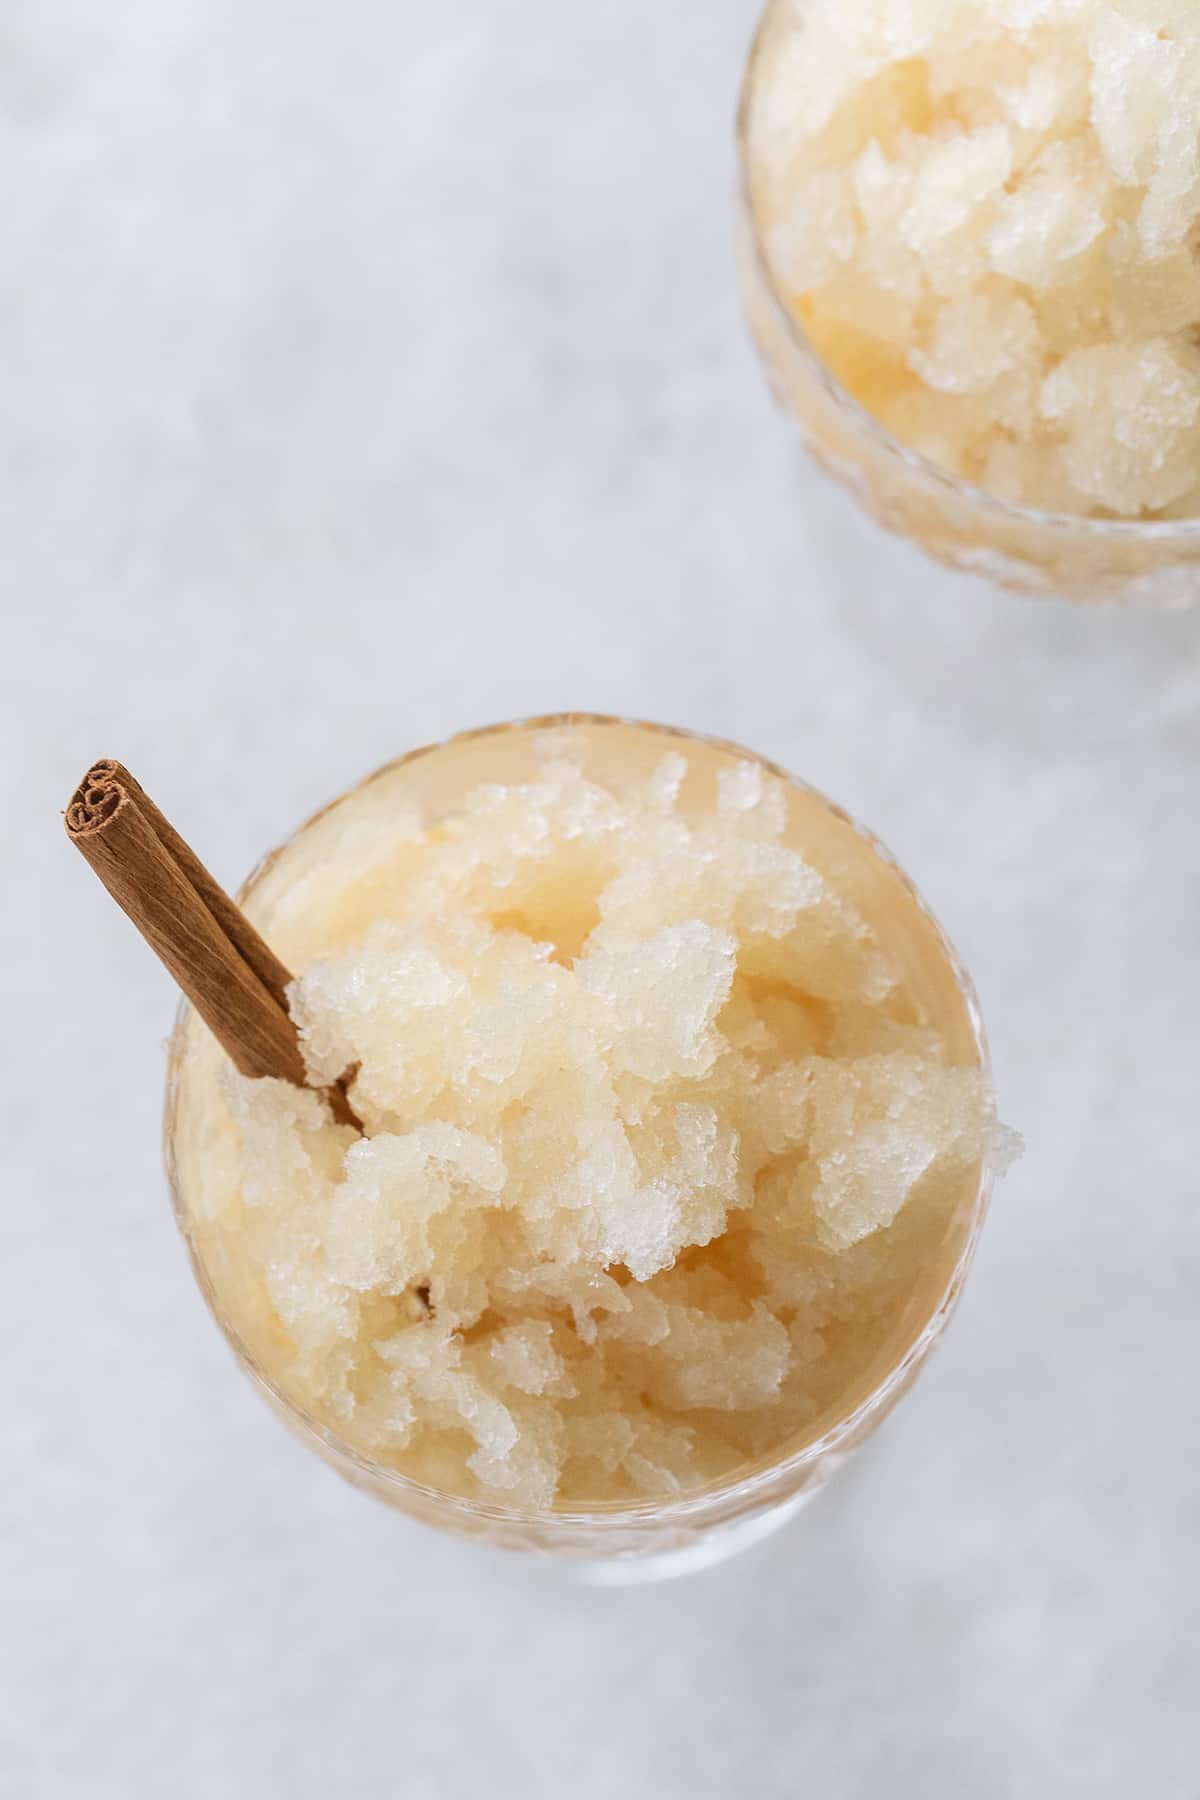 Slushie made with apple cider and spices.